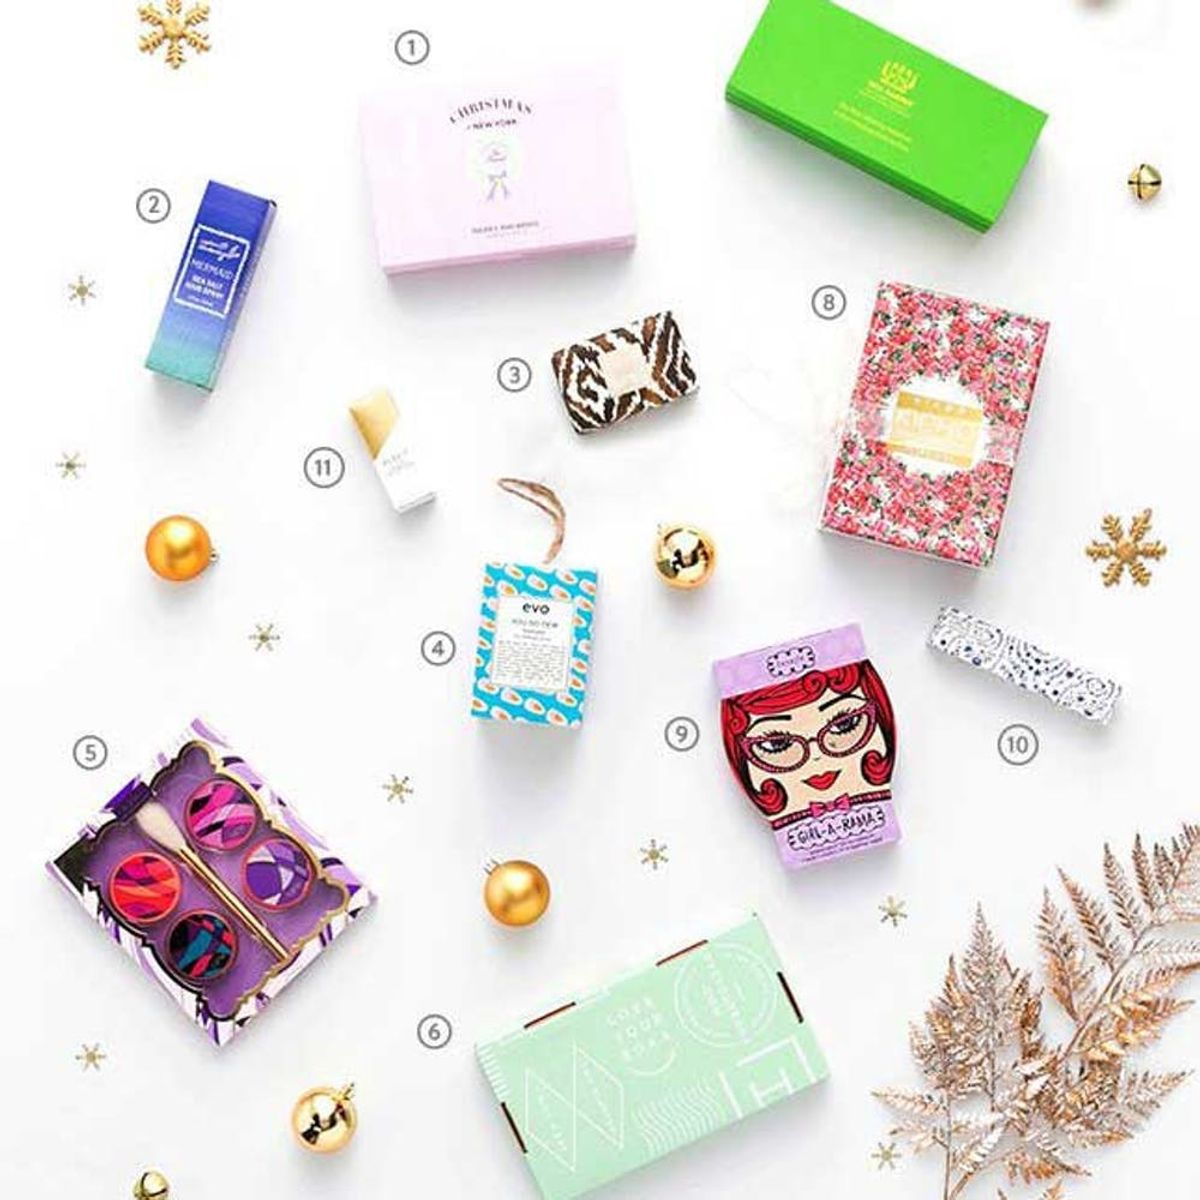 11 Beauty Gifts That Are *So* Pretty You Don’t Need to Wrap ‘Em